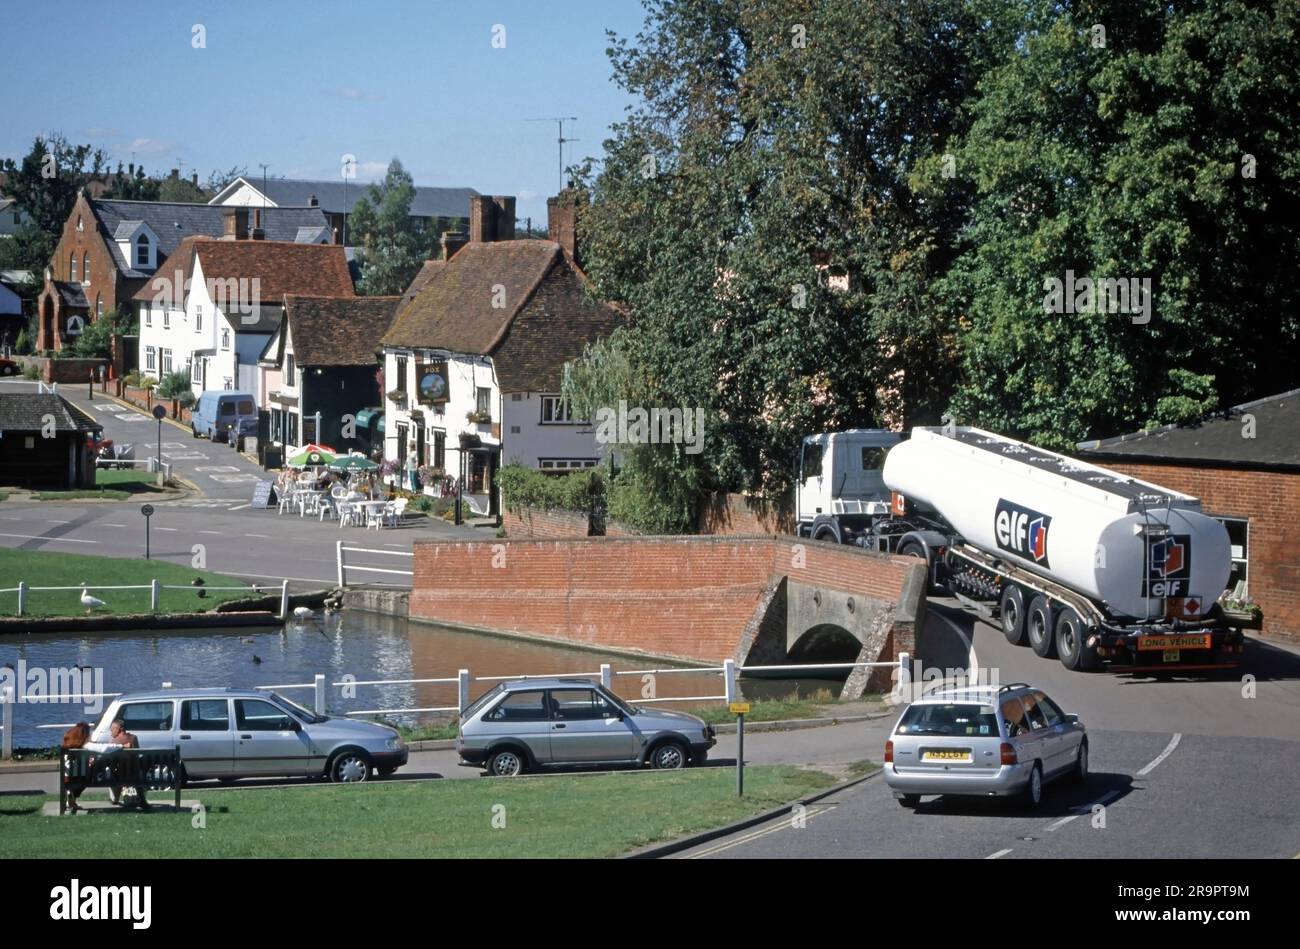 Archival 1994 image of Elf Aquitaine brand and logo on side and back rear end of fuel delivery tanker semi articulated trailer pulled along by hgv lorry truck power unit maneuvering across narrow hump back road bridge in village landscape at Finchingfield in Essex including village pond and car parking in this popular English picture postcard type of visitor attraction in England UK Stock Photo